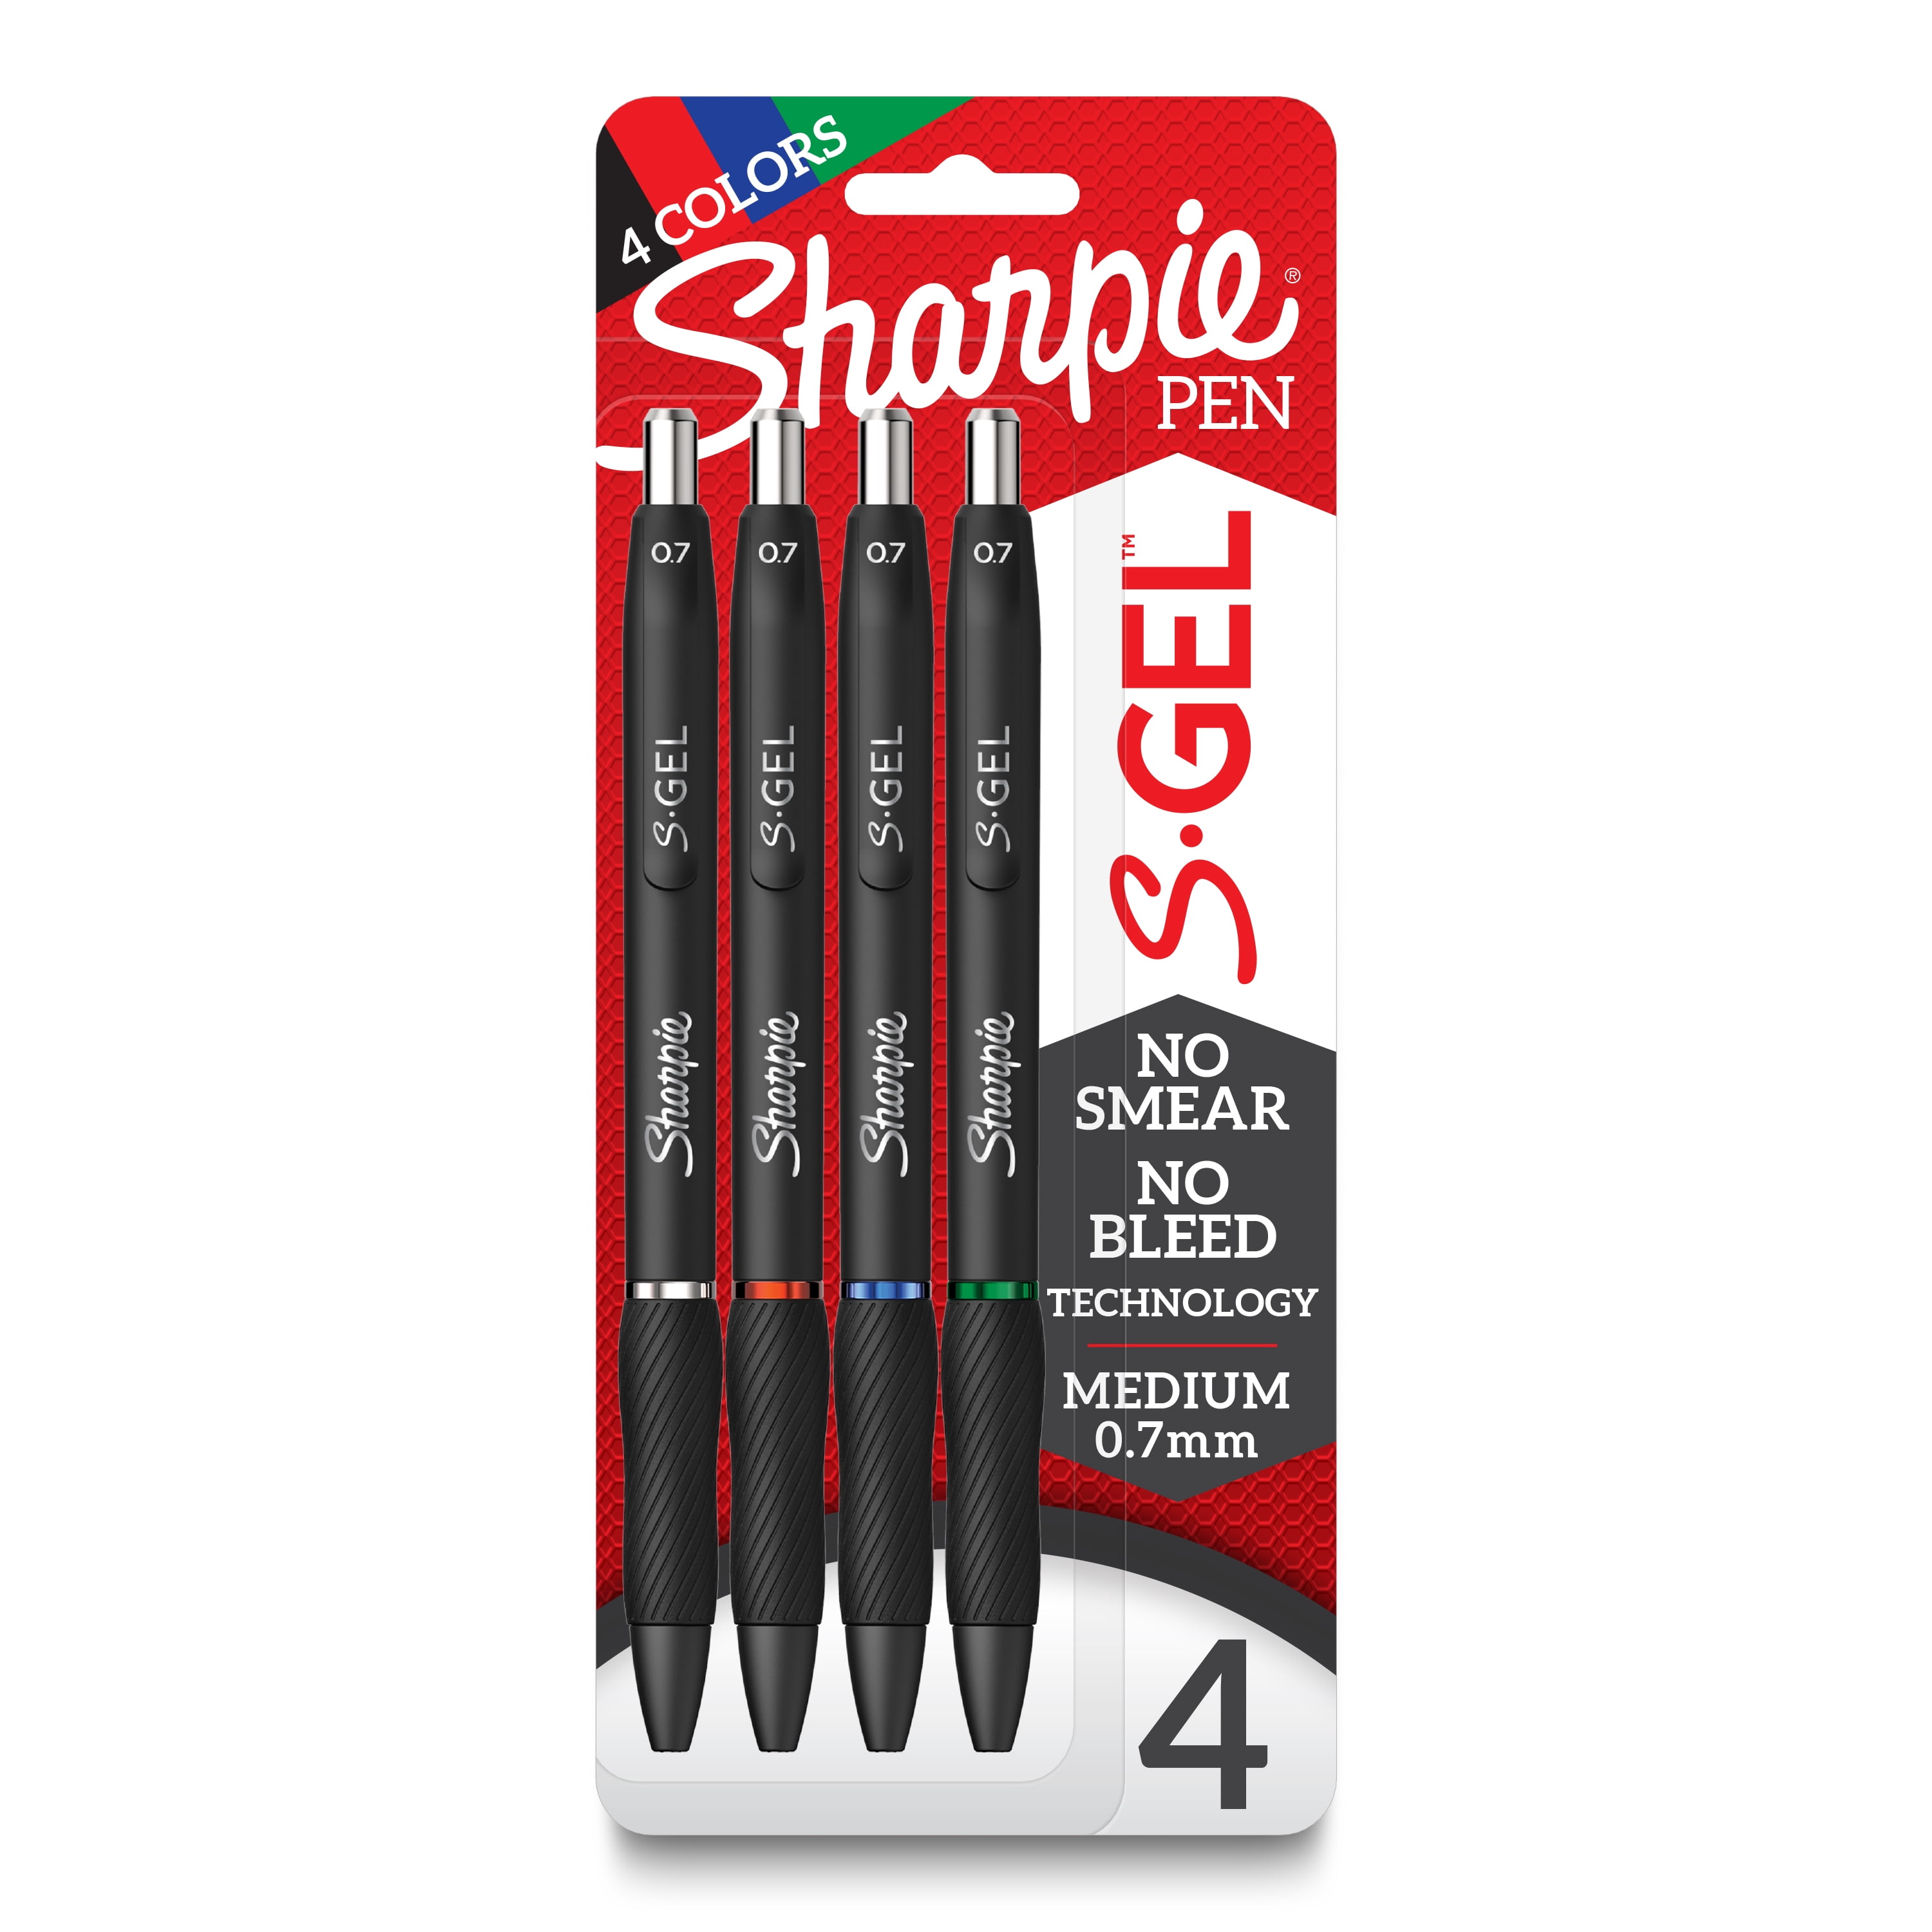 Pen Review: Sharpie S-Gel and Roller Pens - The Well-Appointed Desk